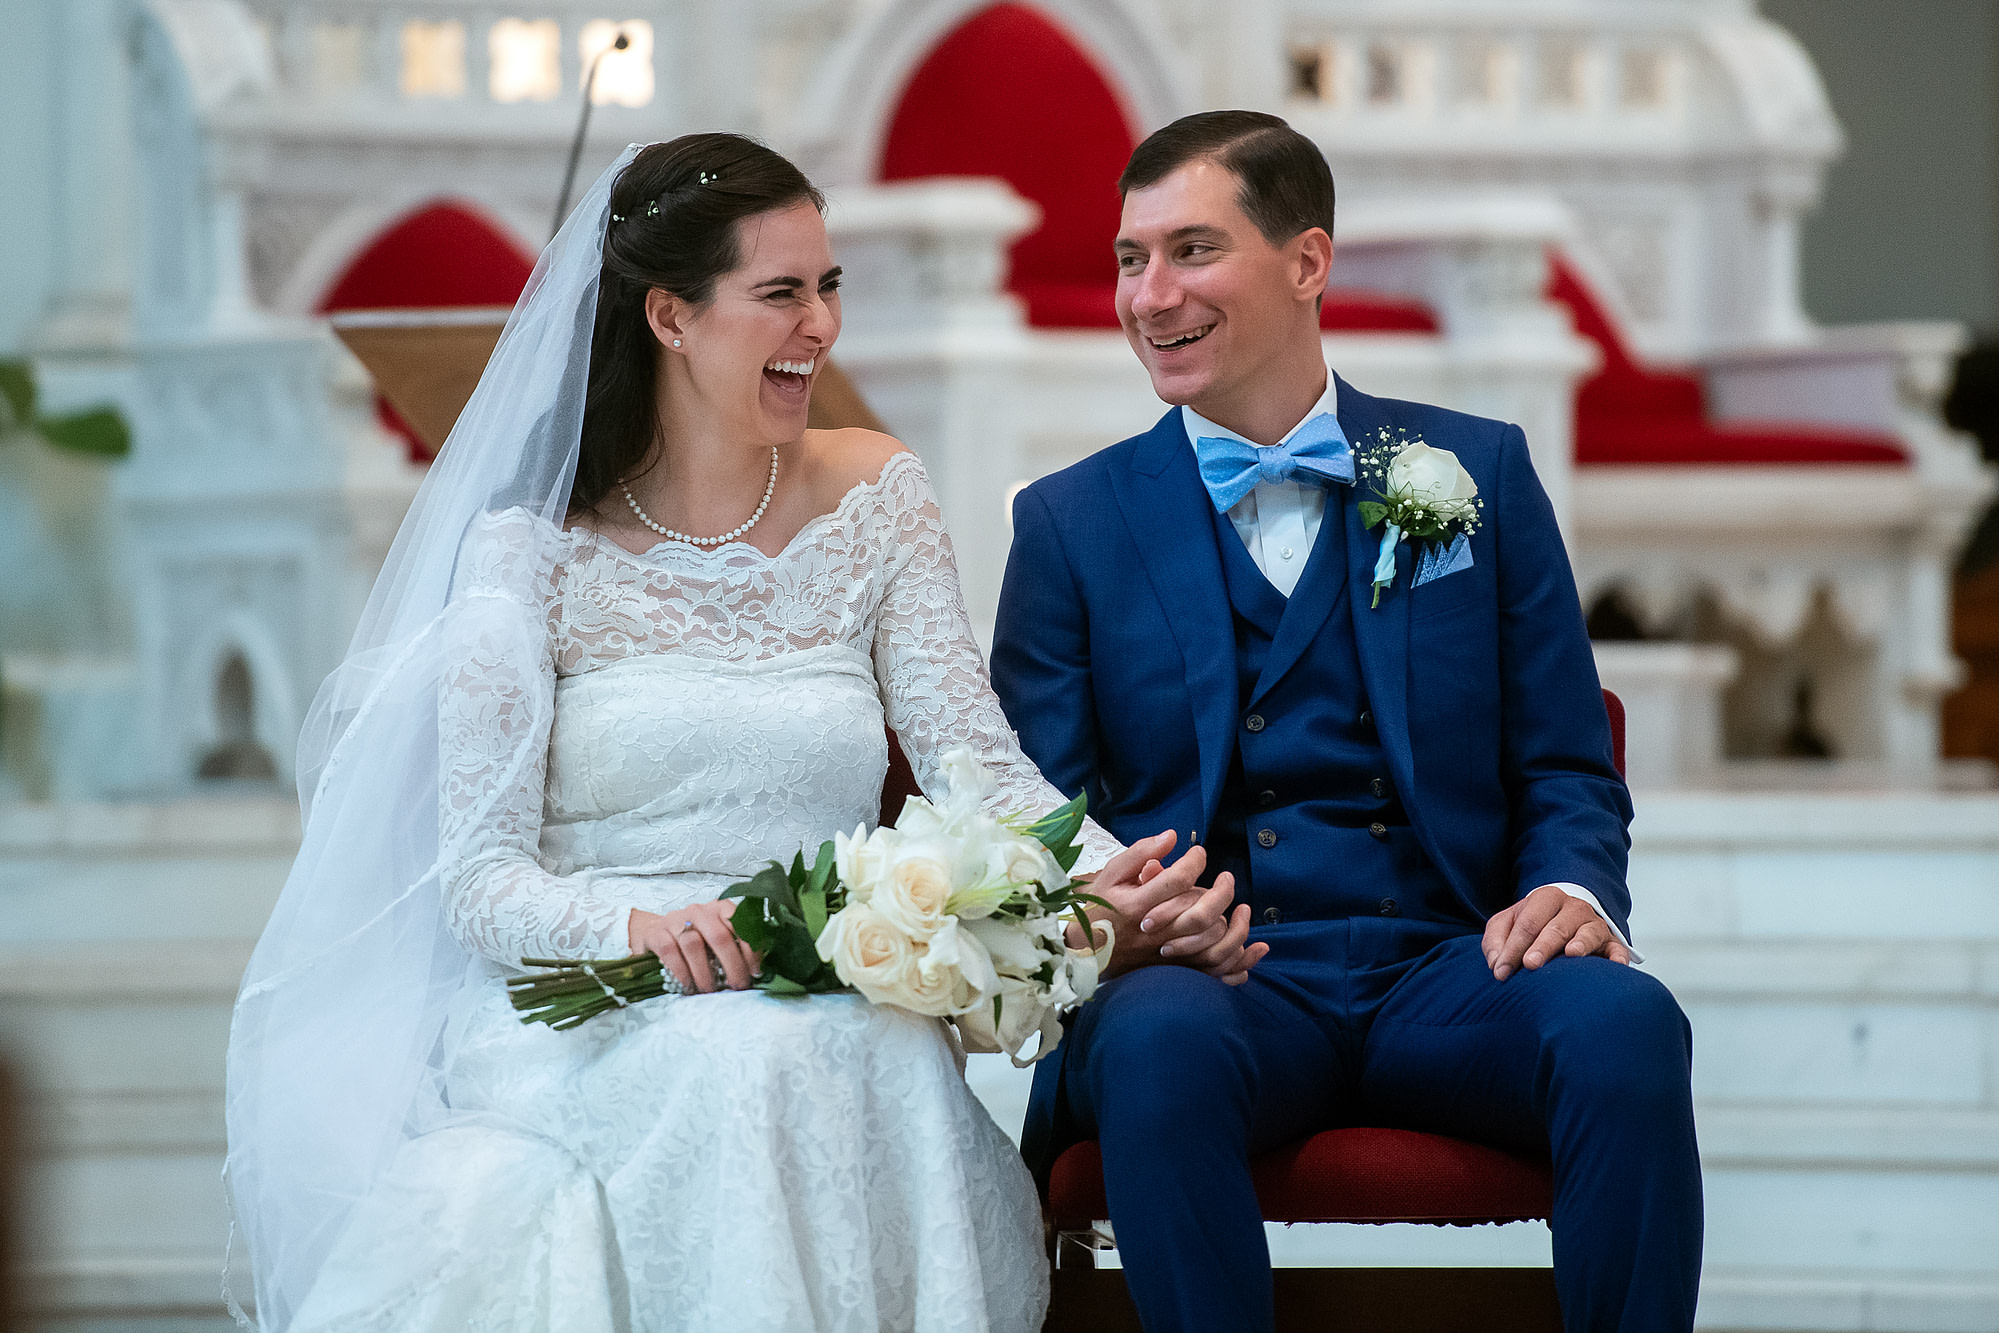 Bride and groom laugh during their wedding at the Cathedral Basilica of the Immaculate Conception in Denver, Colorado.